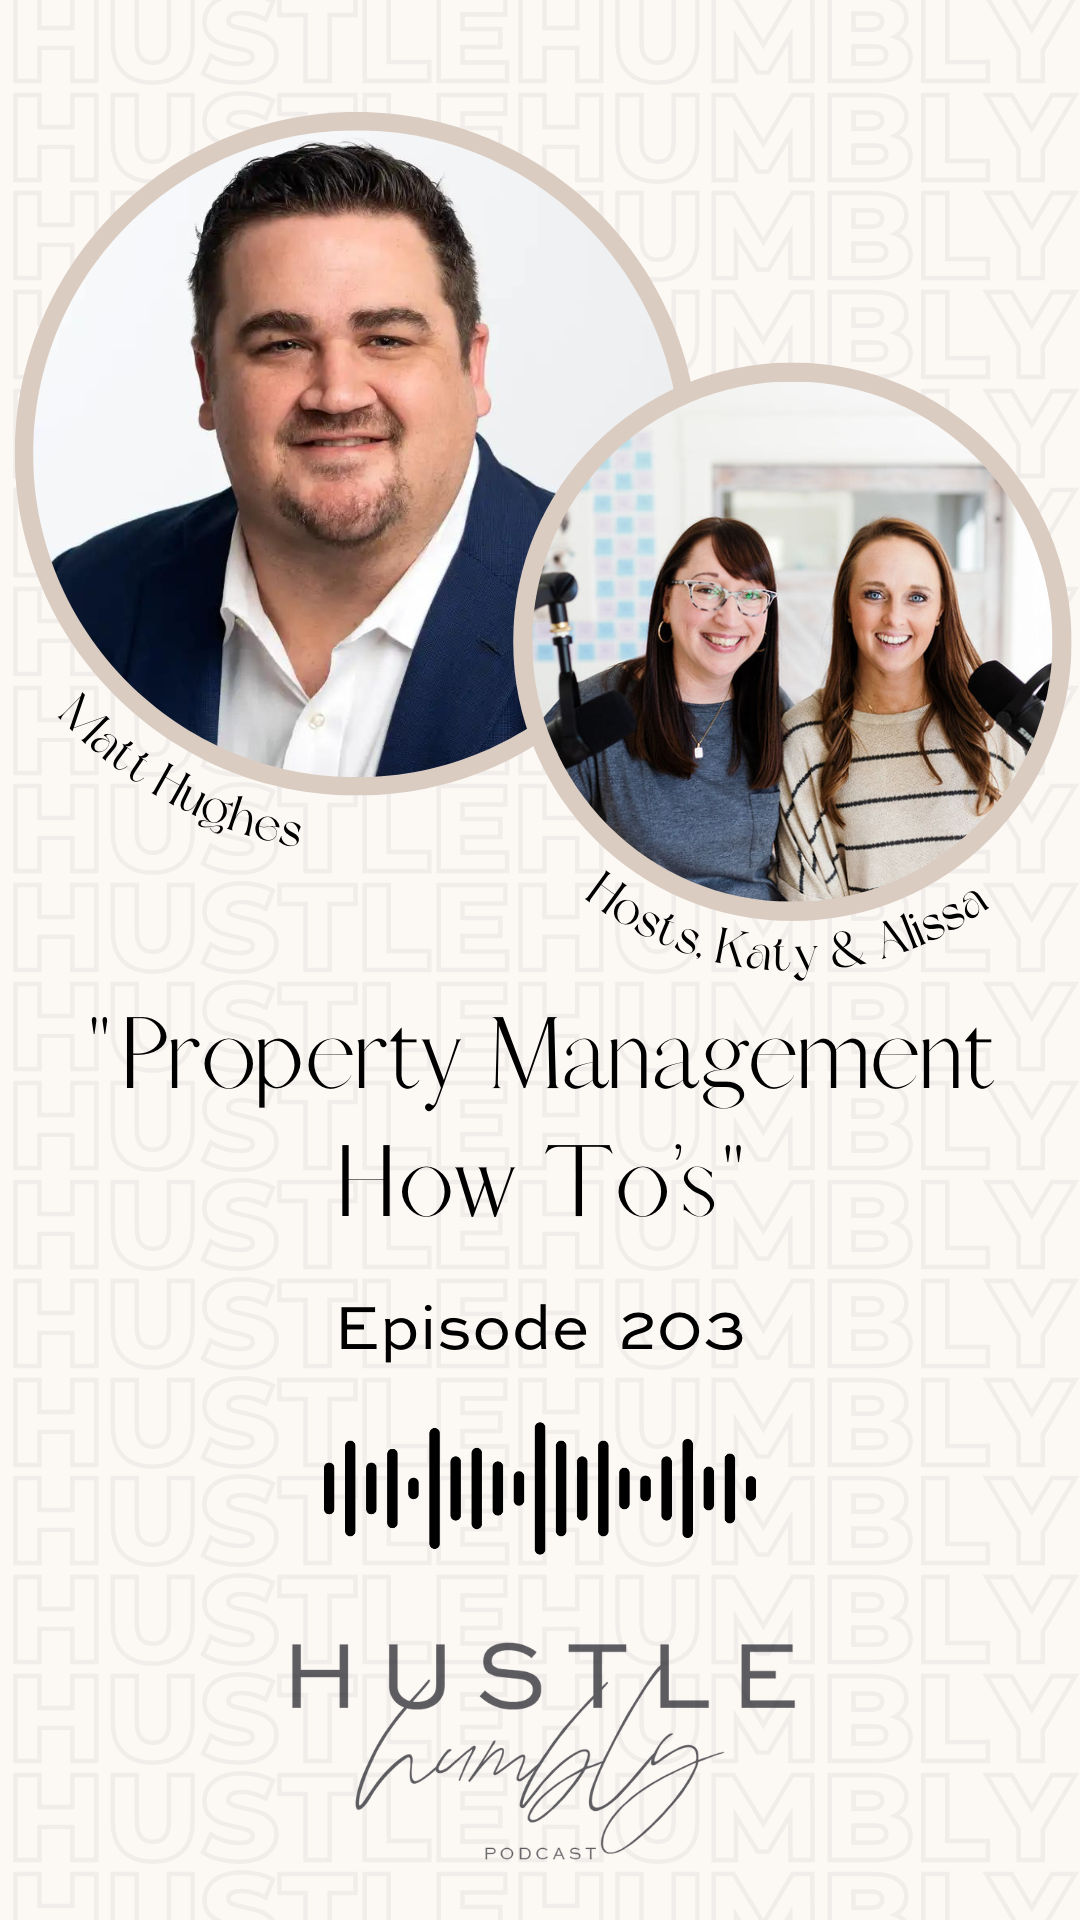 Hustle Humbly Episode 203: Property Management How To’s with Matt Hughes